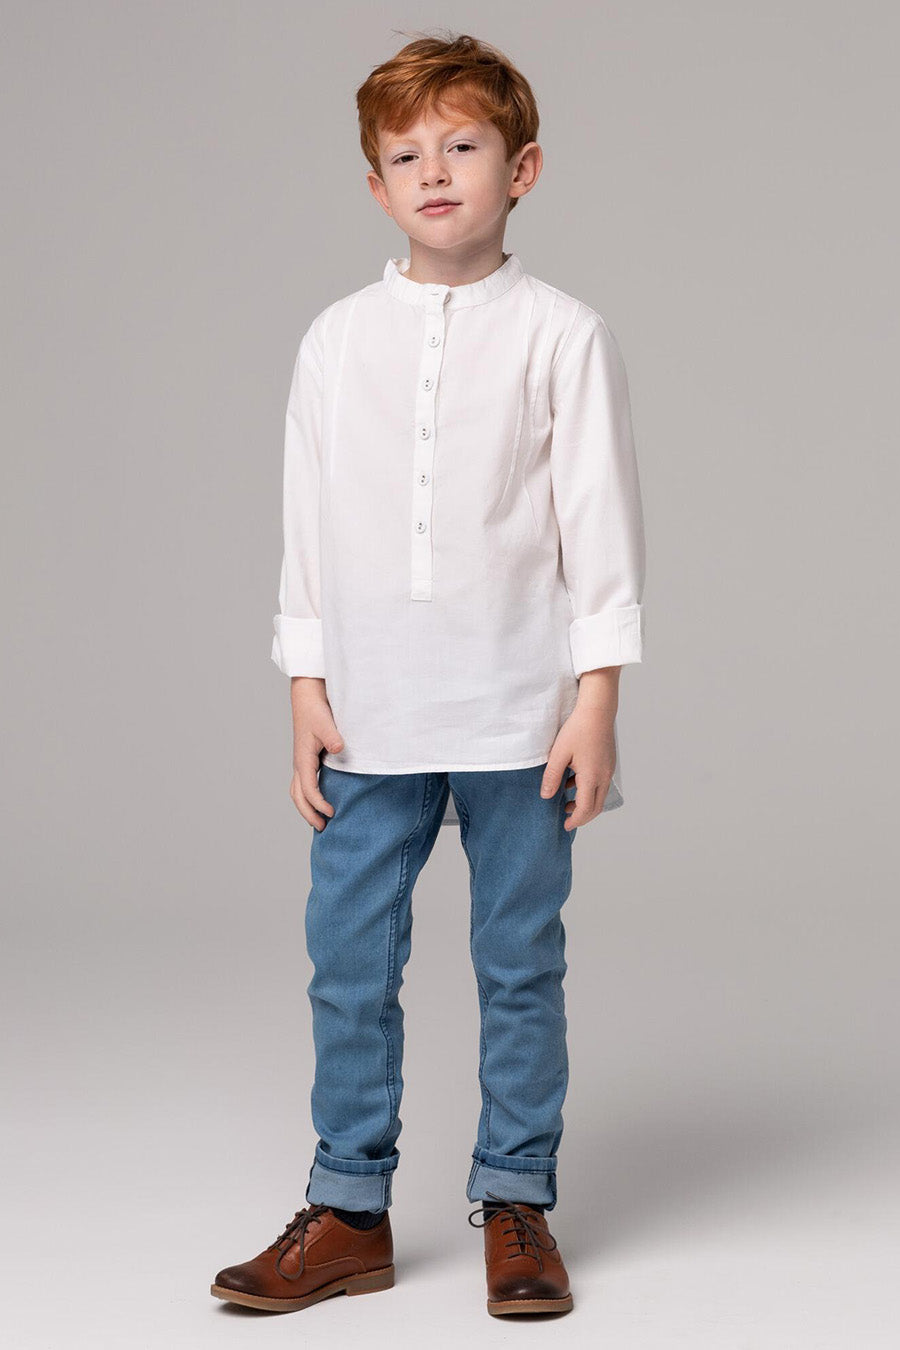 Boys Shirts, T-Shirts and Tops at Mini Ruby Contemporary Childrenswear